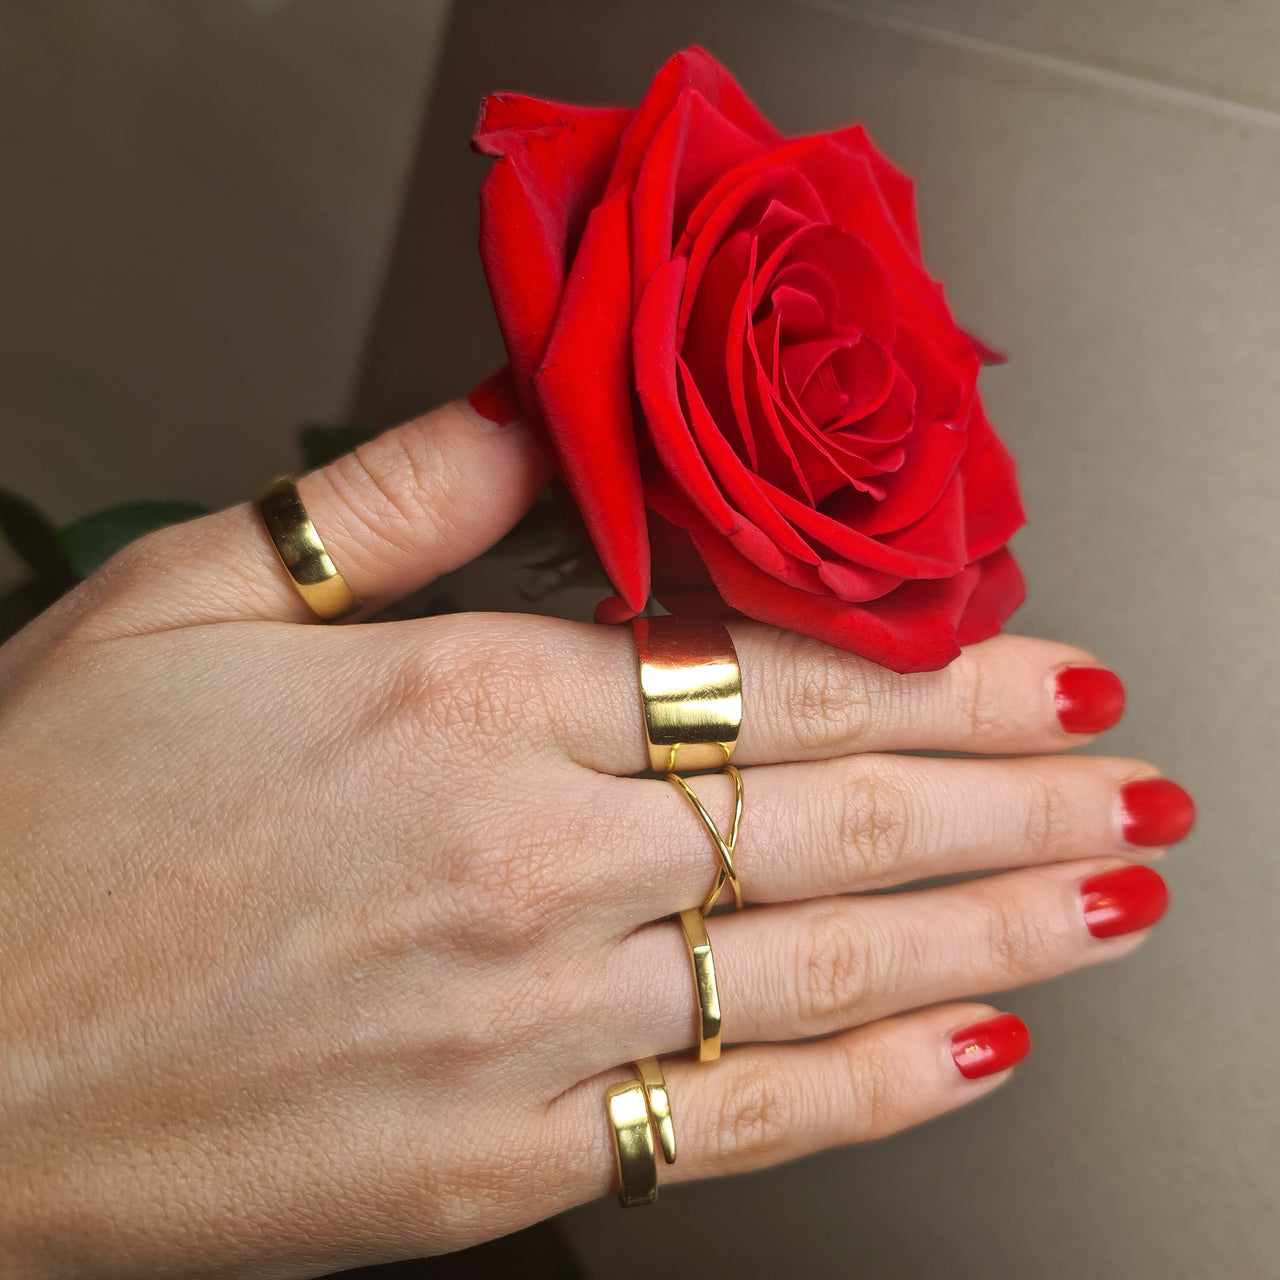 model with painted nails holding a rose with 5 adjustable 14k gold rings on